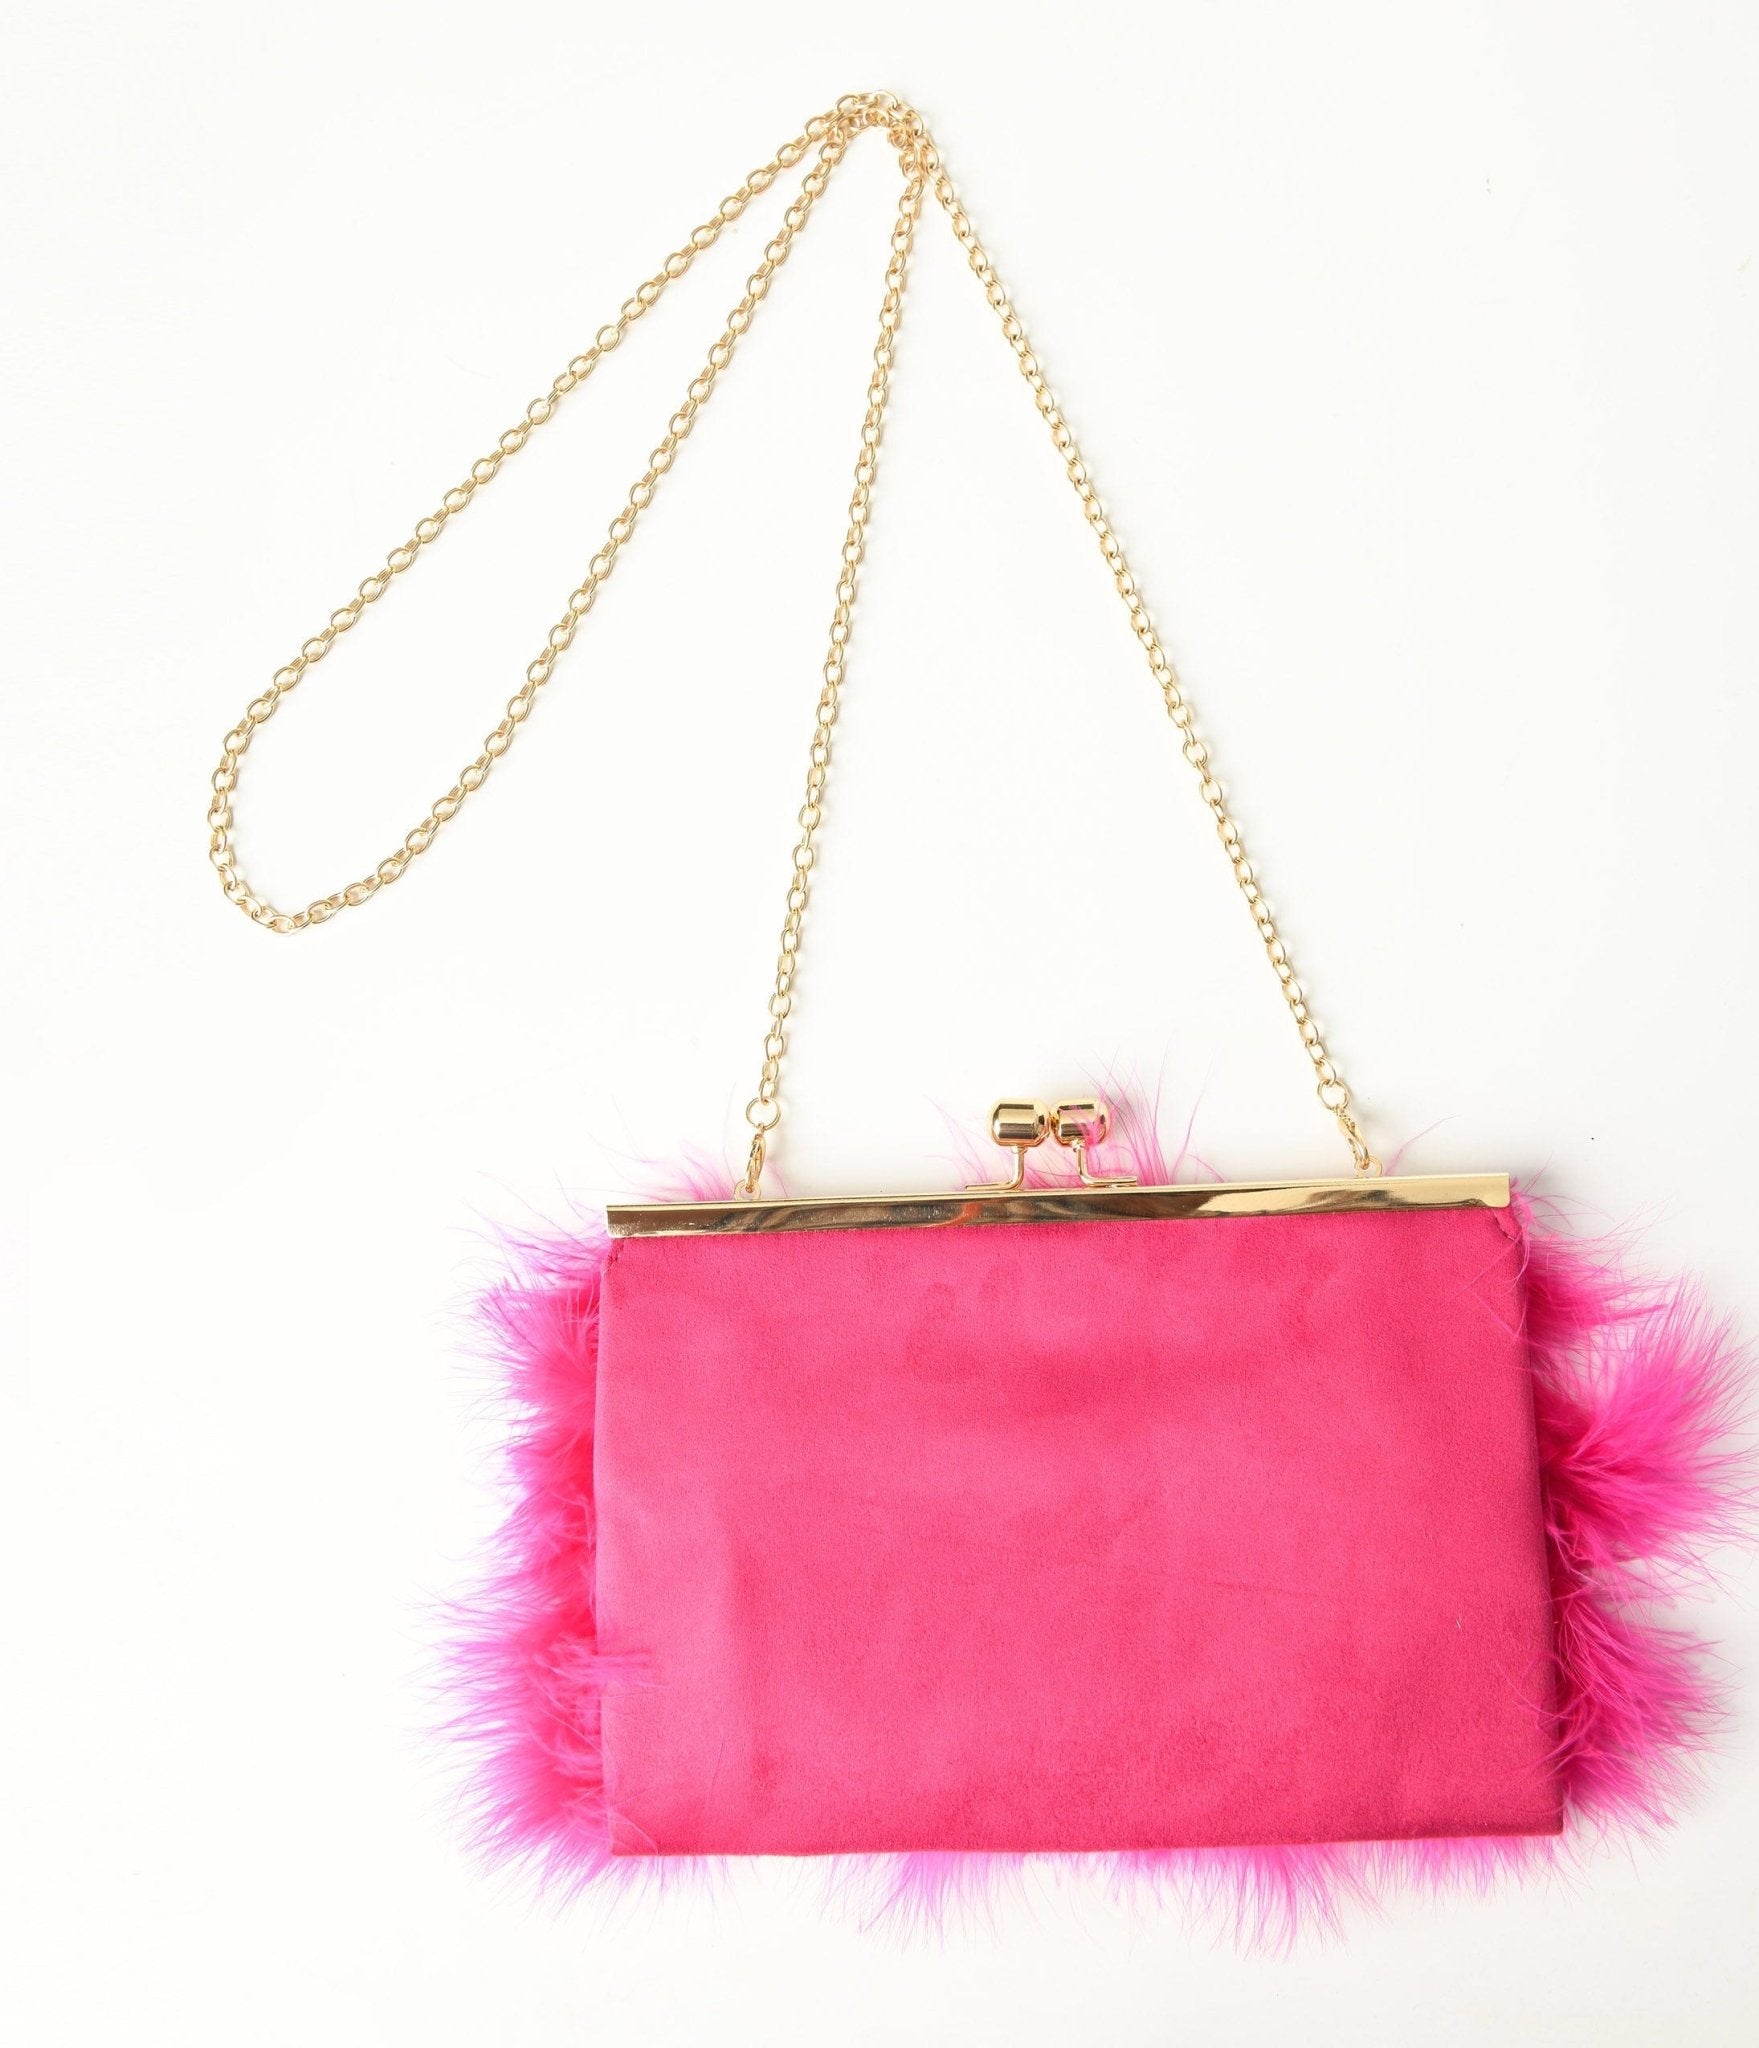 Shop for Pink Clutches Online in India | Myntra